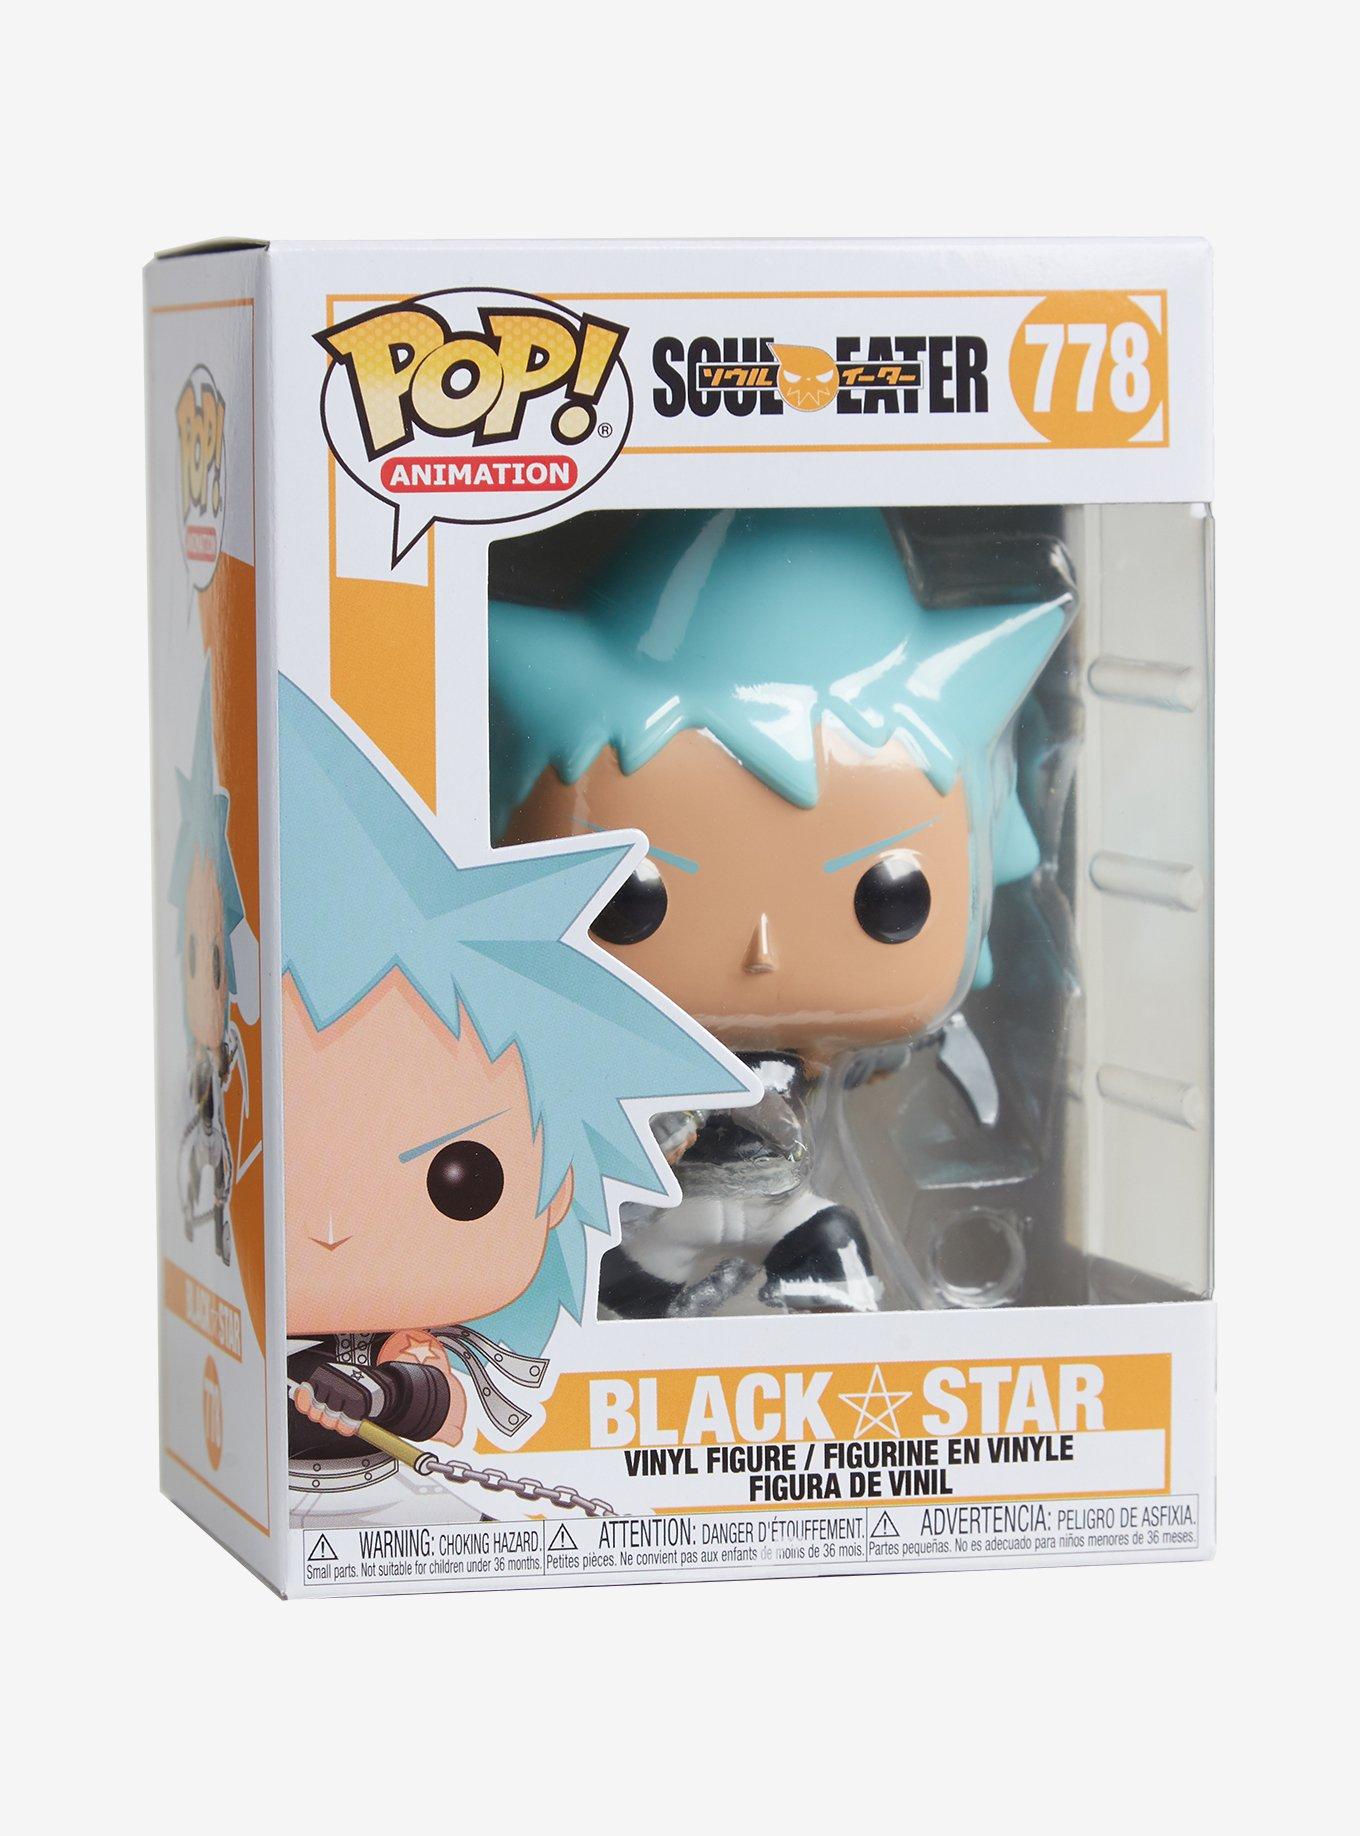 Funko - Coming soon: Pop! Animation - Soul Eater Click here to add to your  wishlist!  Funimation Soul Eater GameStop #SoulEater  #gamestop #Funko #Pop #FunkoPop